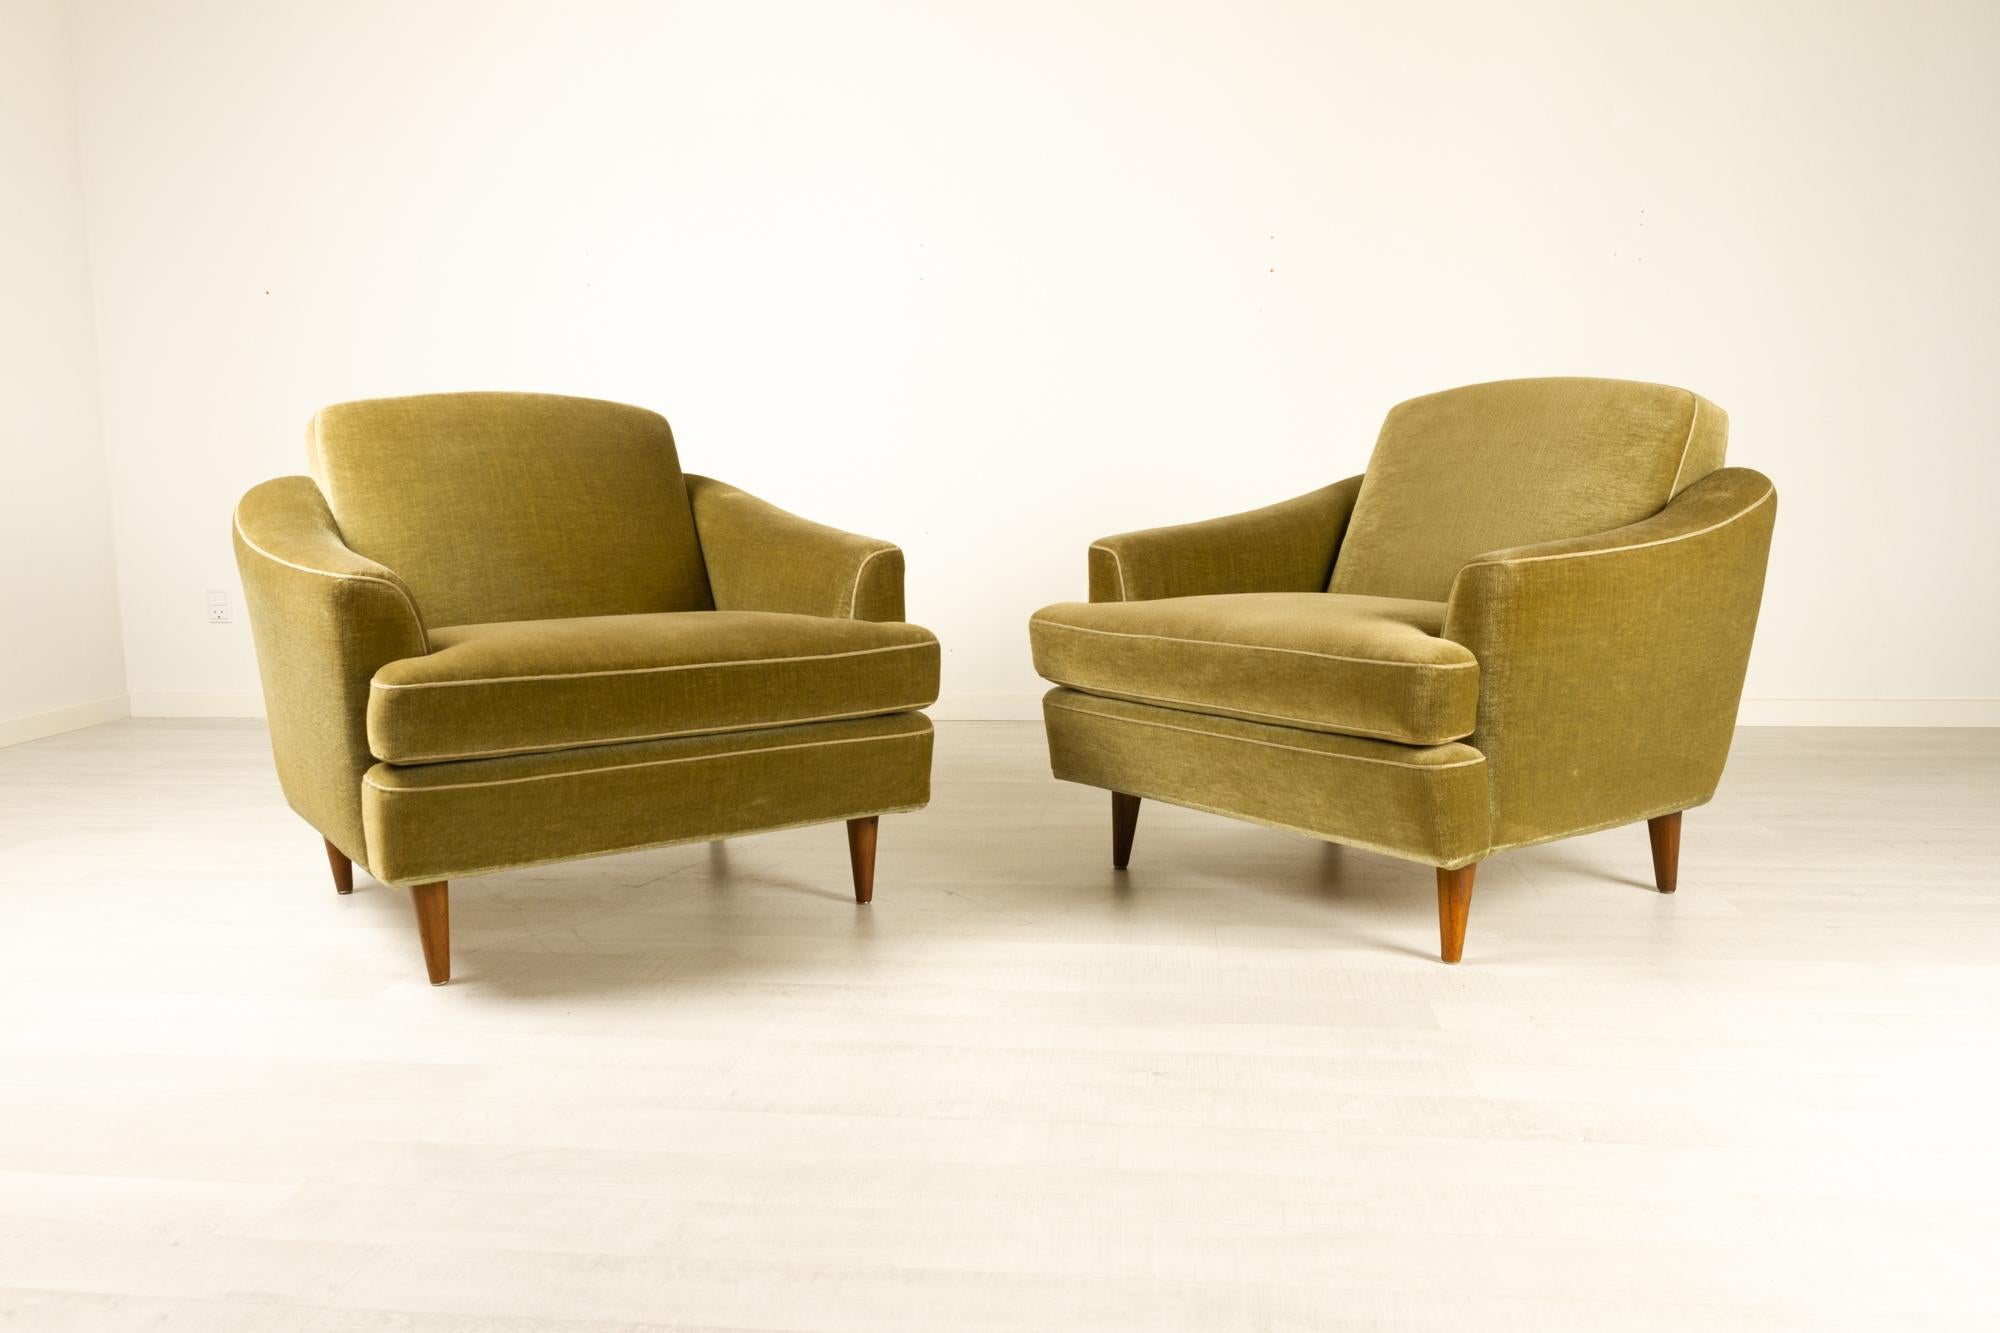 Pair of Danish modern green velvet lounge chairs, 1950s
Stunning set of two very comfortable green velvet velour lounge chairs. Round tapered legs in solid teak. Removable spring cushions for a soft but firm seating. Low back with wide curved